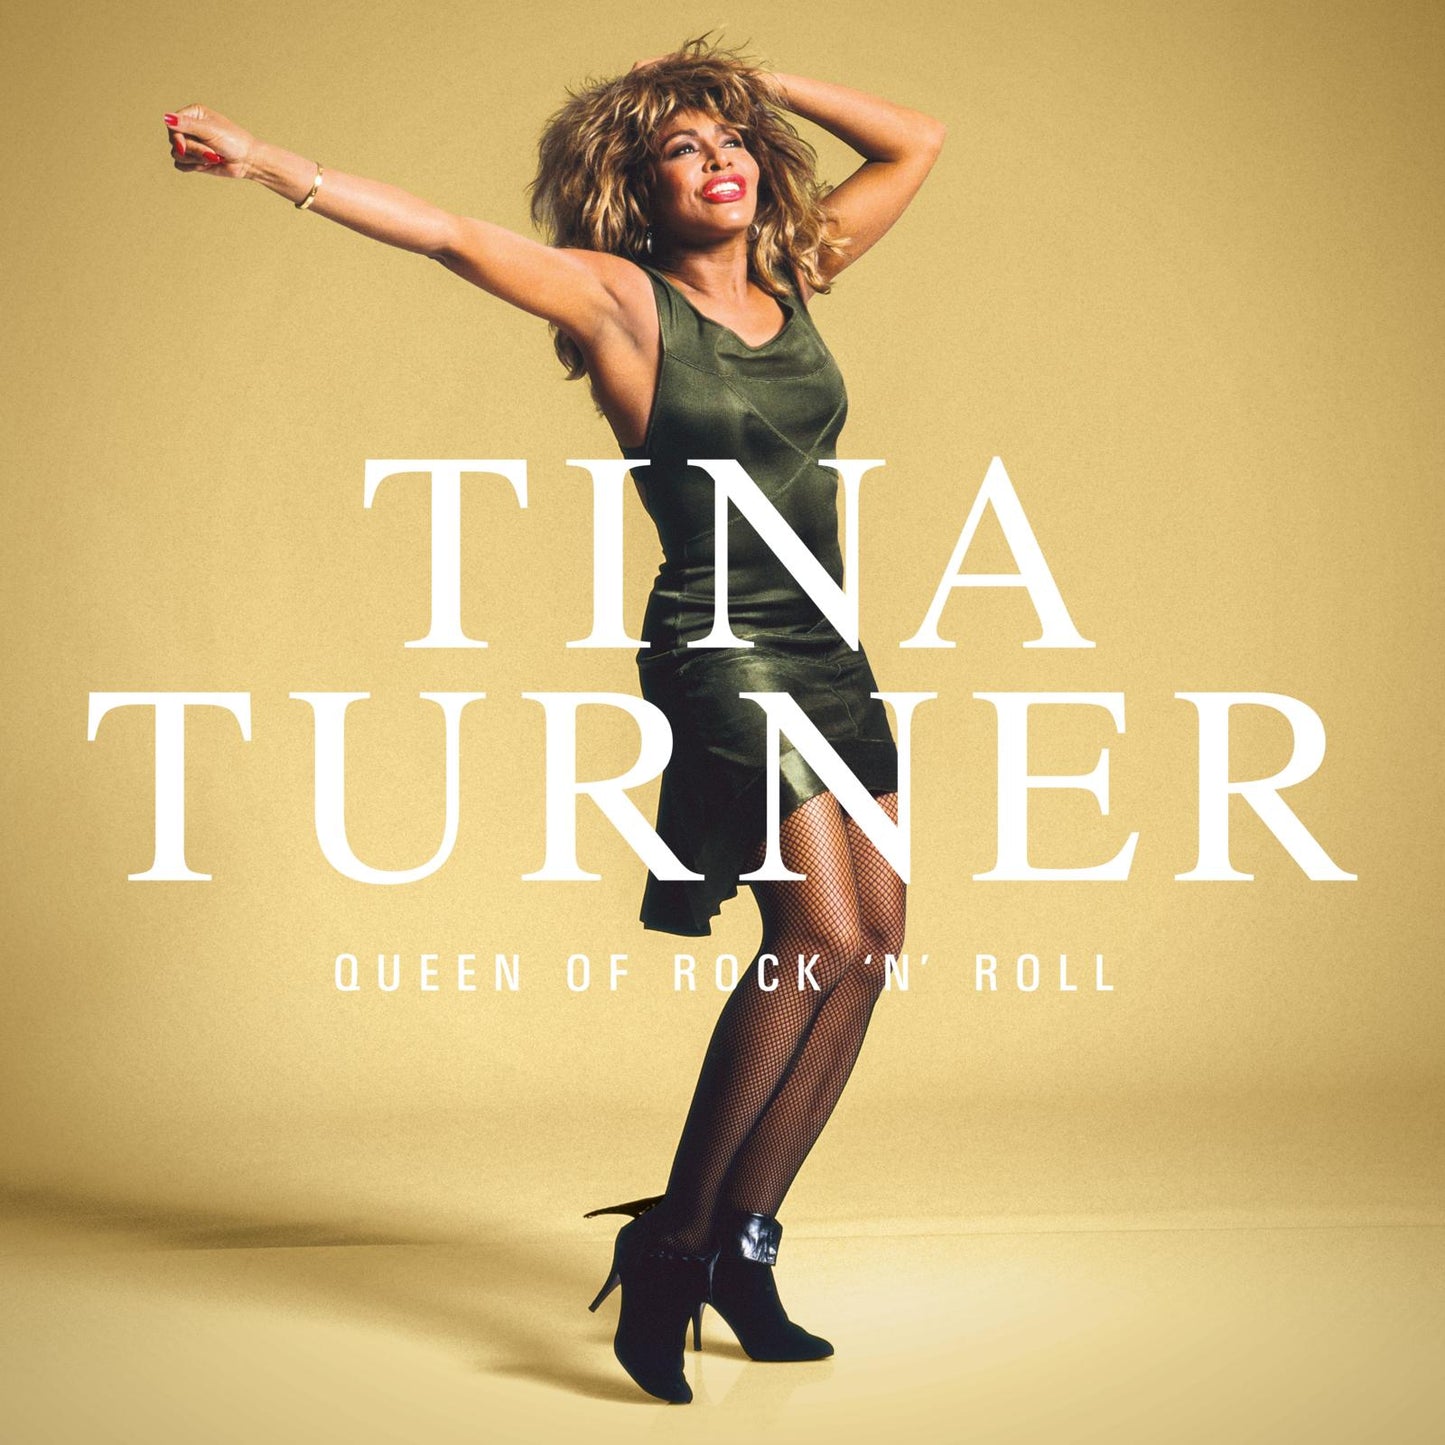 Tina Turner The Queen of Rock and Roll